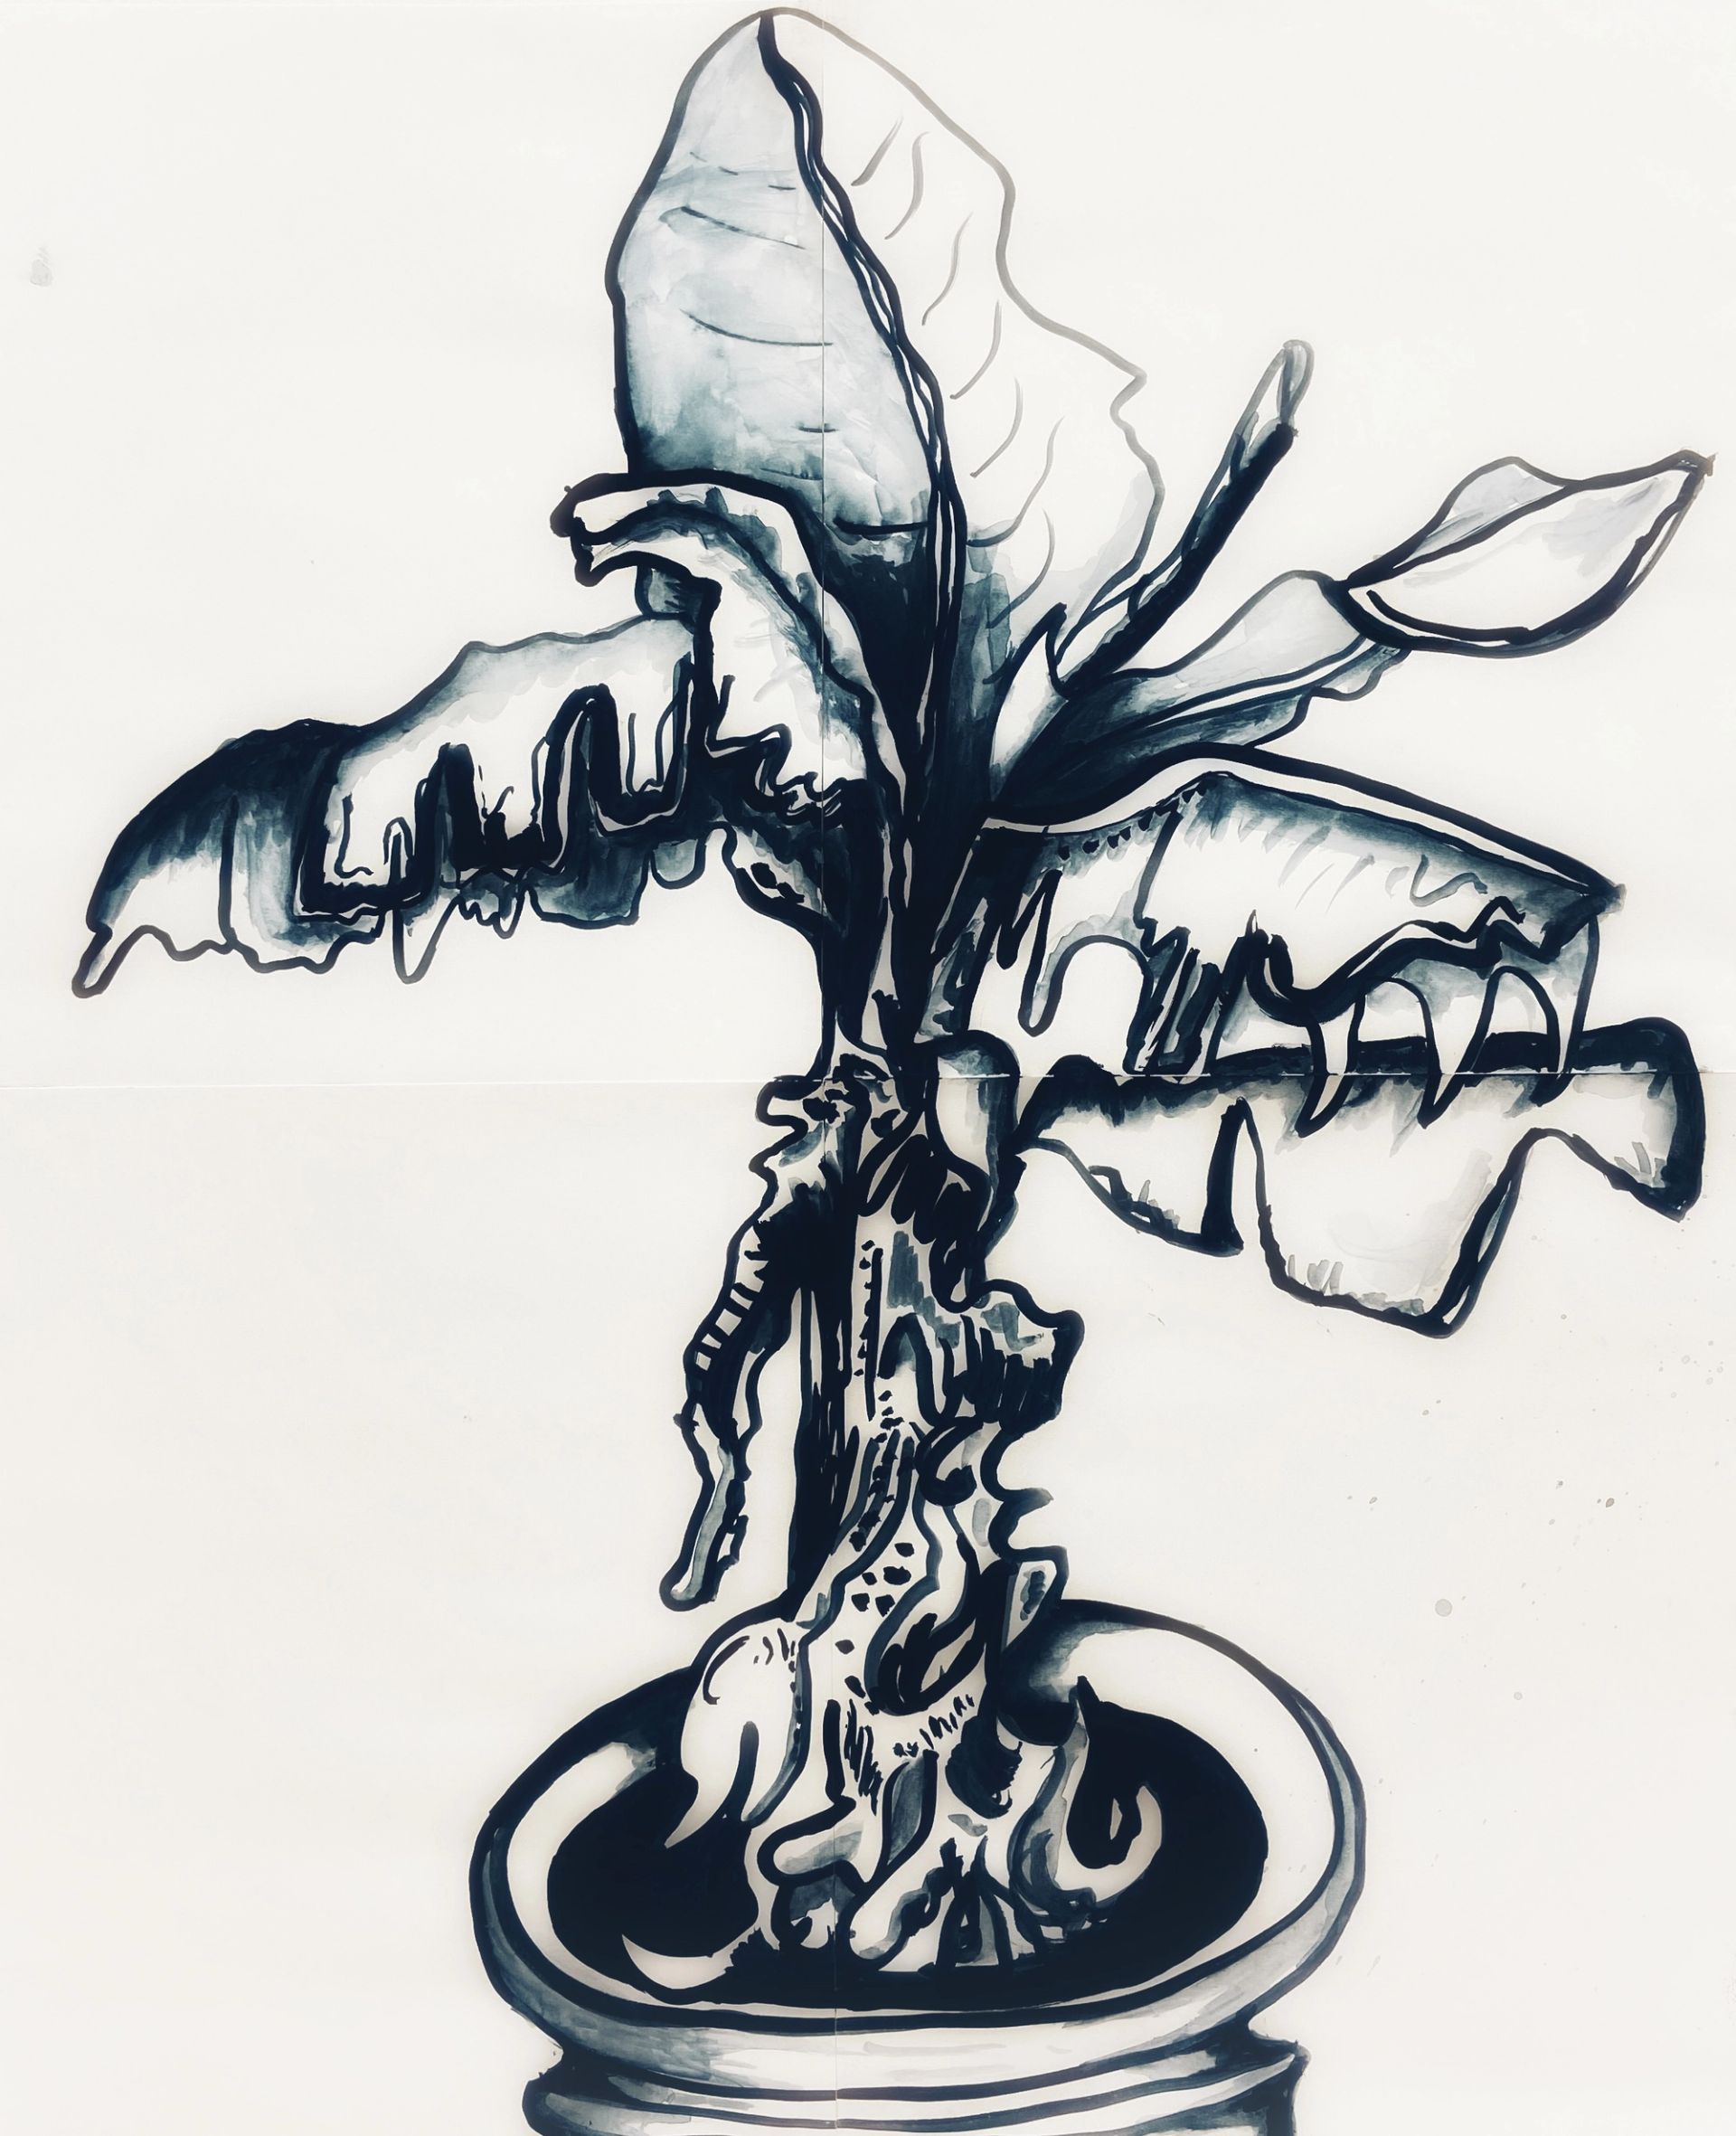 Anna McCarthy, “Banana Plant (Finale)”, 2020, indian ink on paper, 56.5 × 48 cm